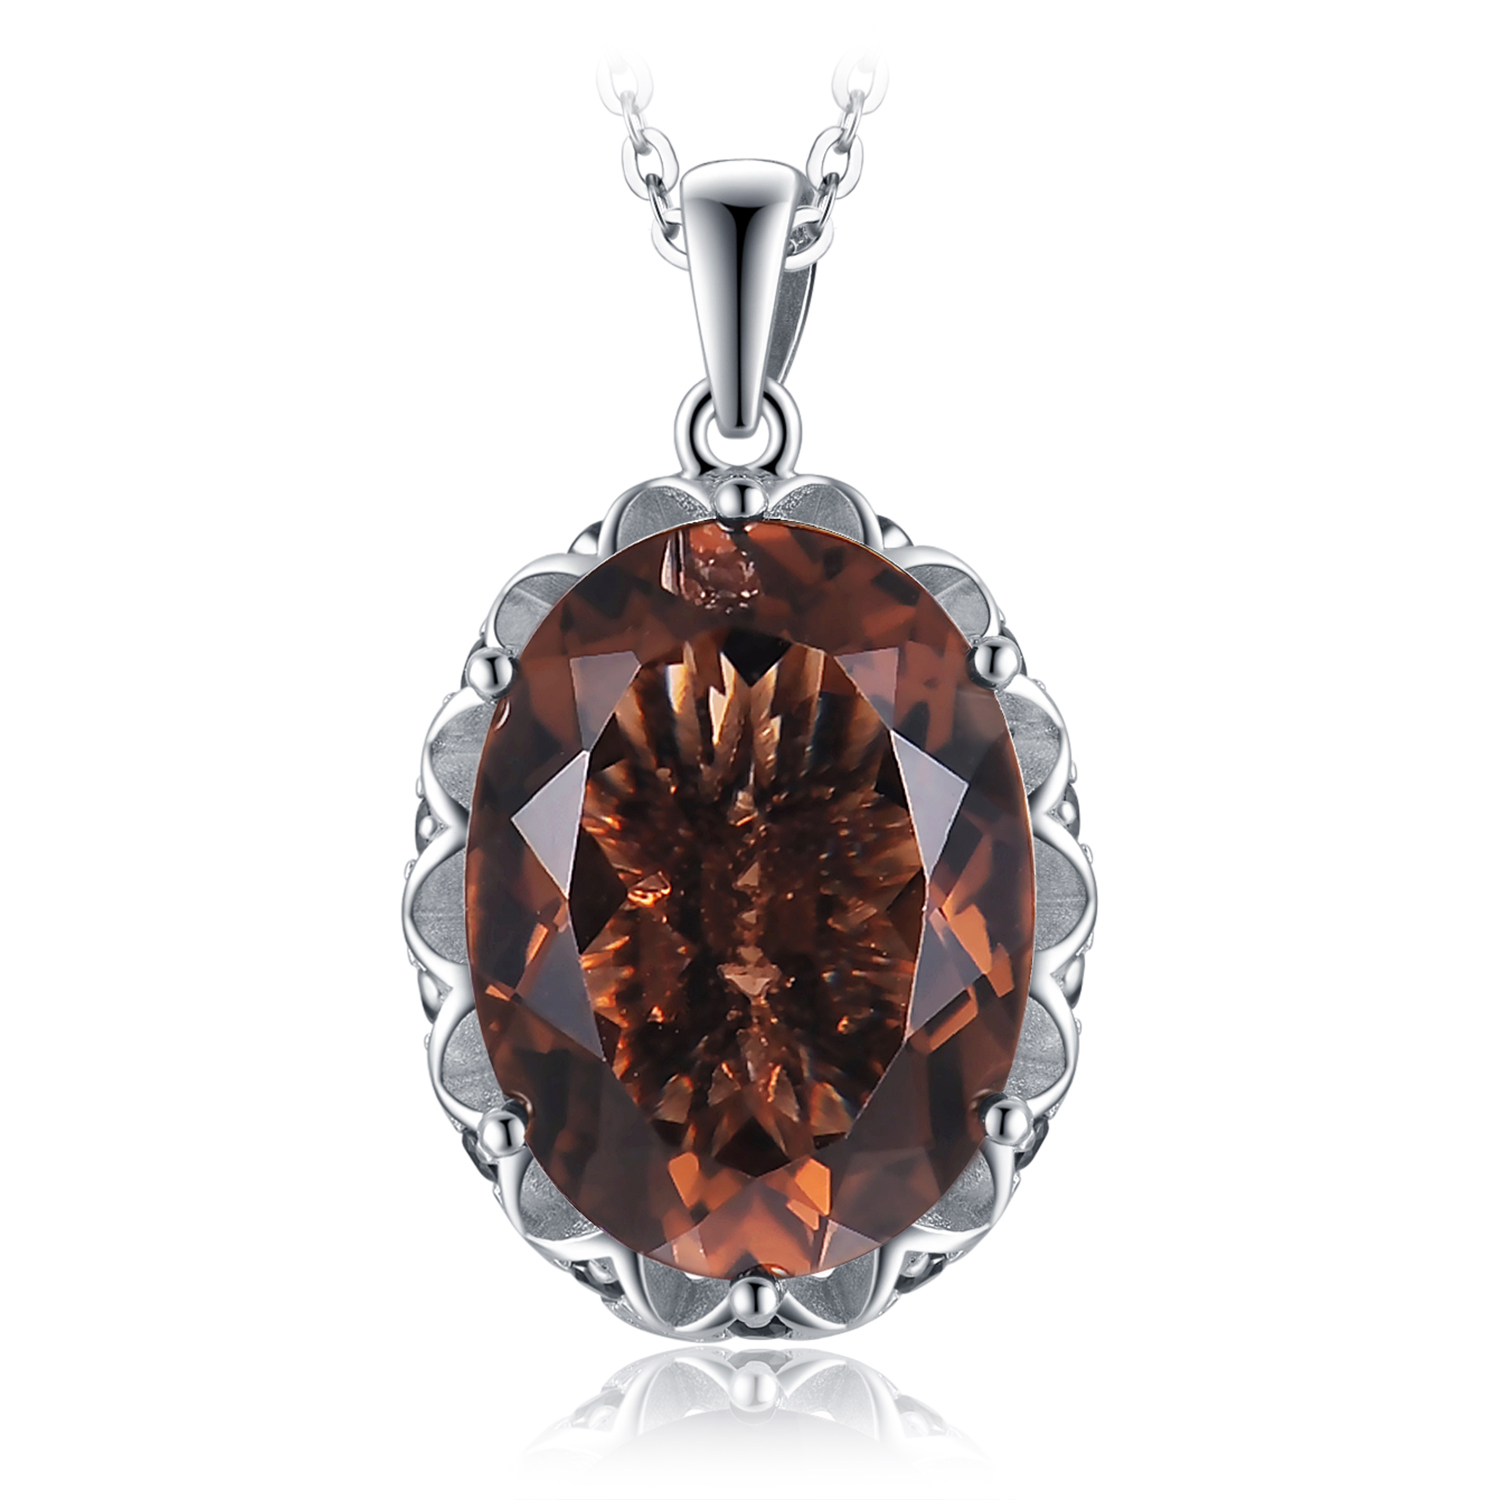 JewelryPalace 8.1ct Oval Shape Created Smoky Quartz 0.4ct Cubic Zirconia Pendant 925 Sterling Silver